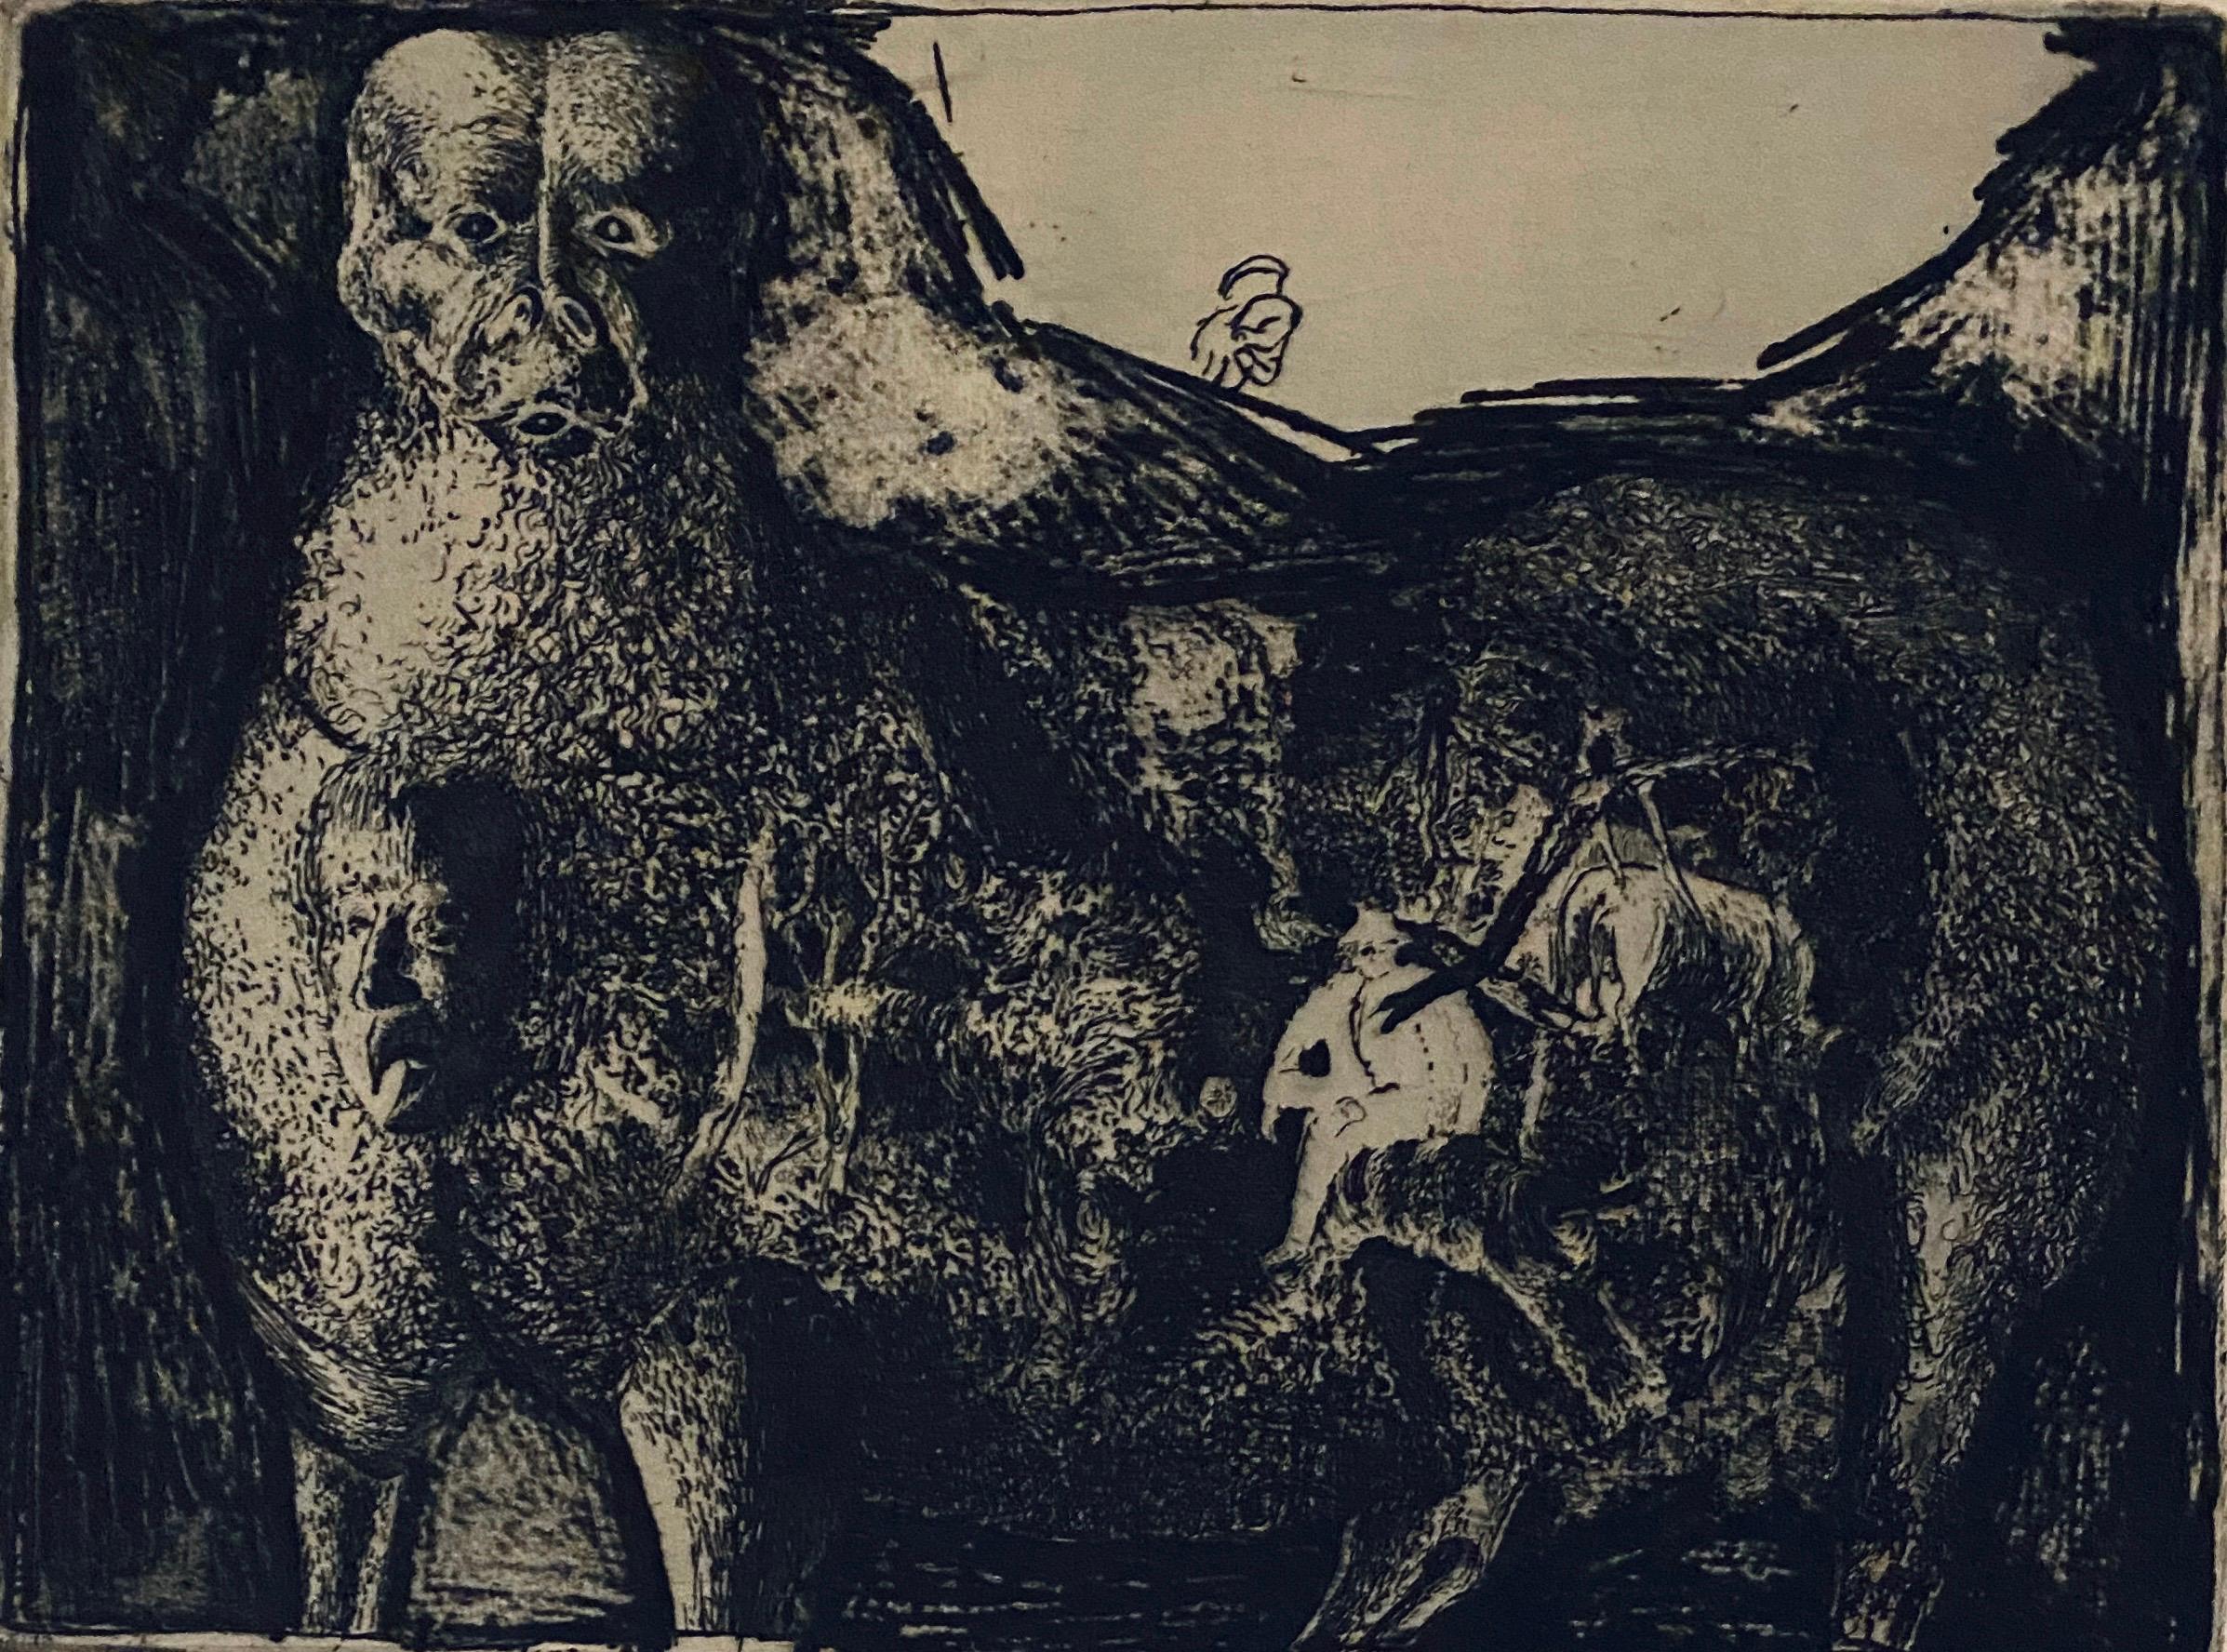 Robert A. Birmelin Interior Print - Beast With Tree In Stomach, American Modernist Abstract Etching